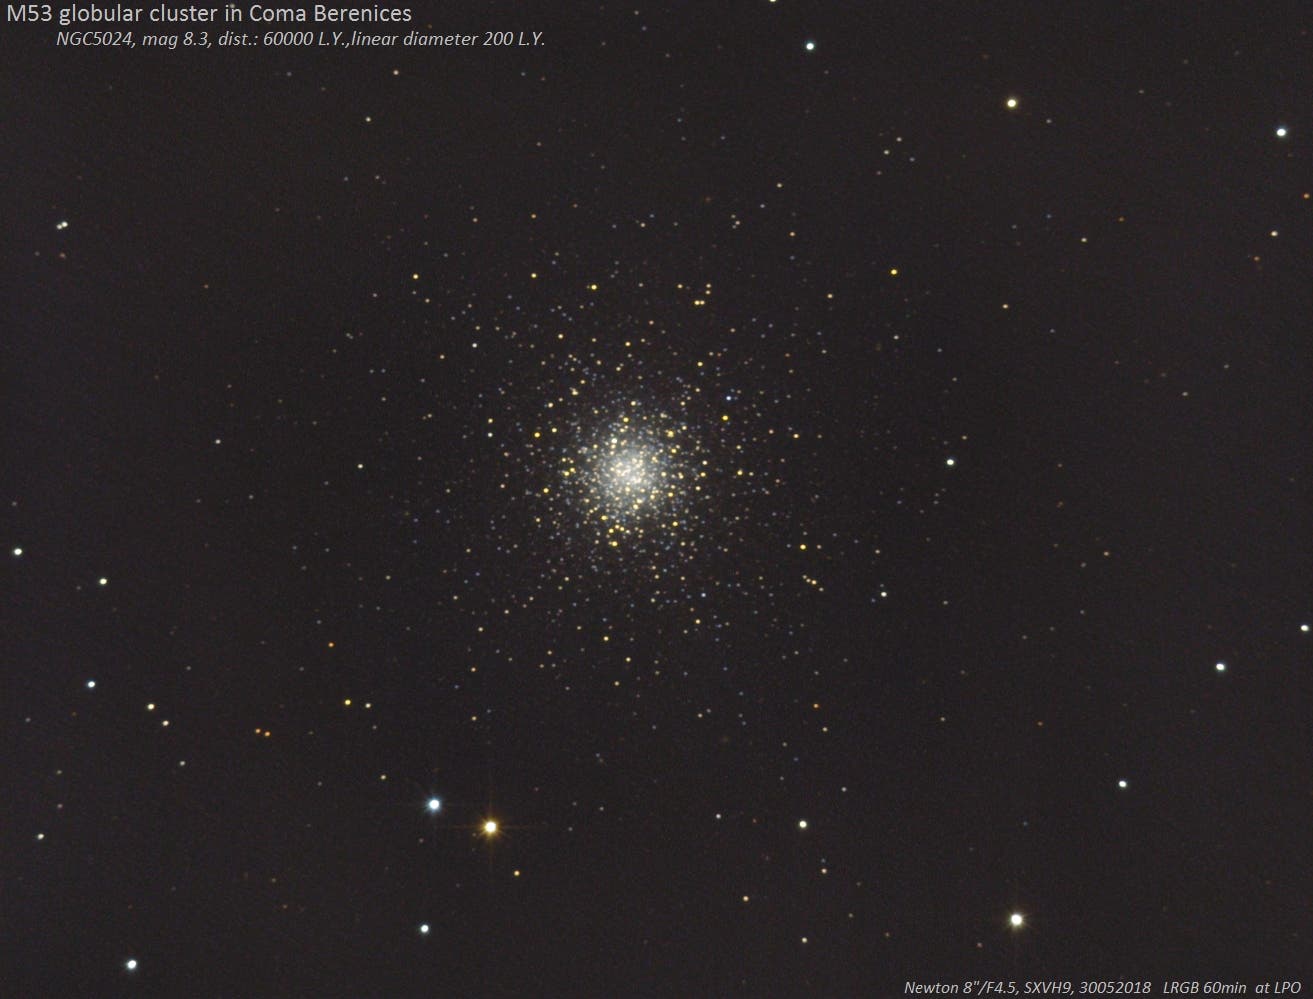 Messier 53 in Coma Berenices